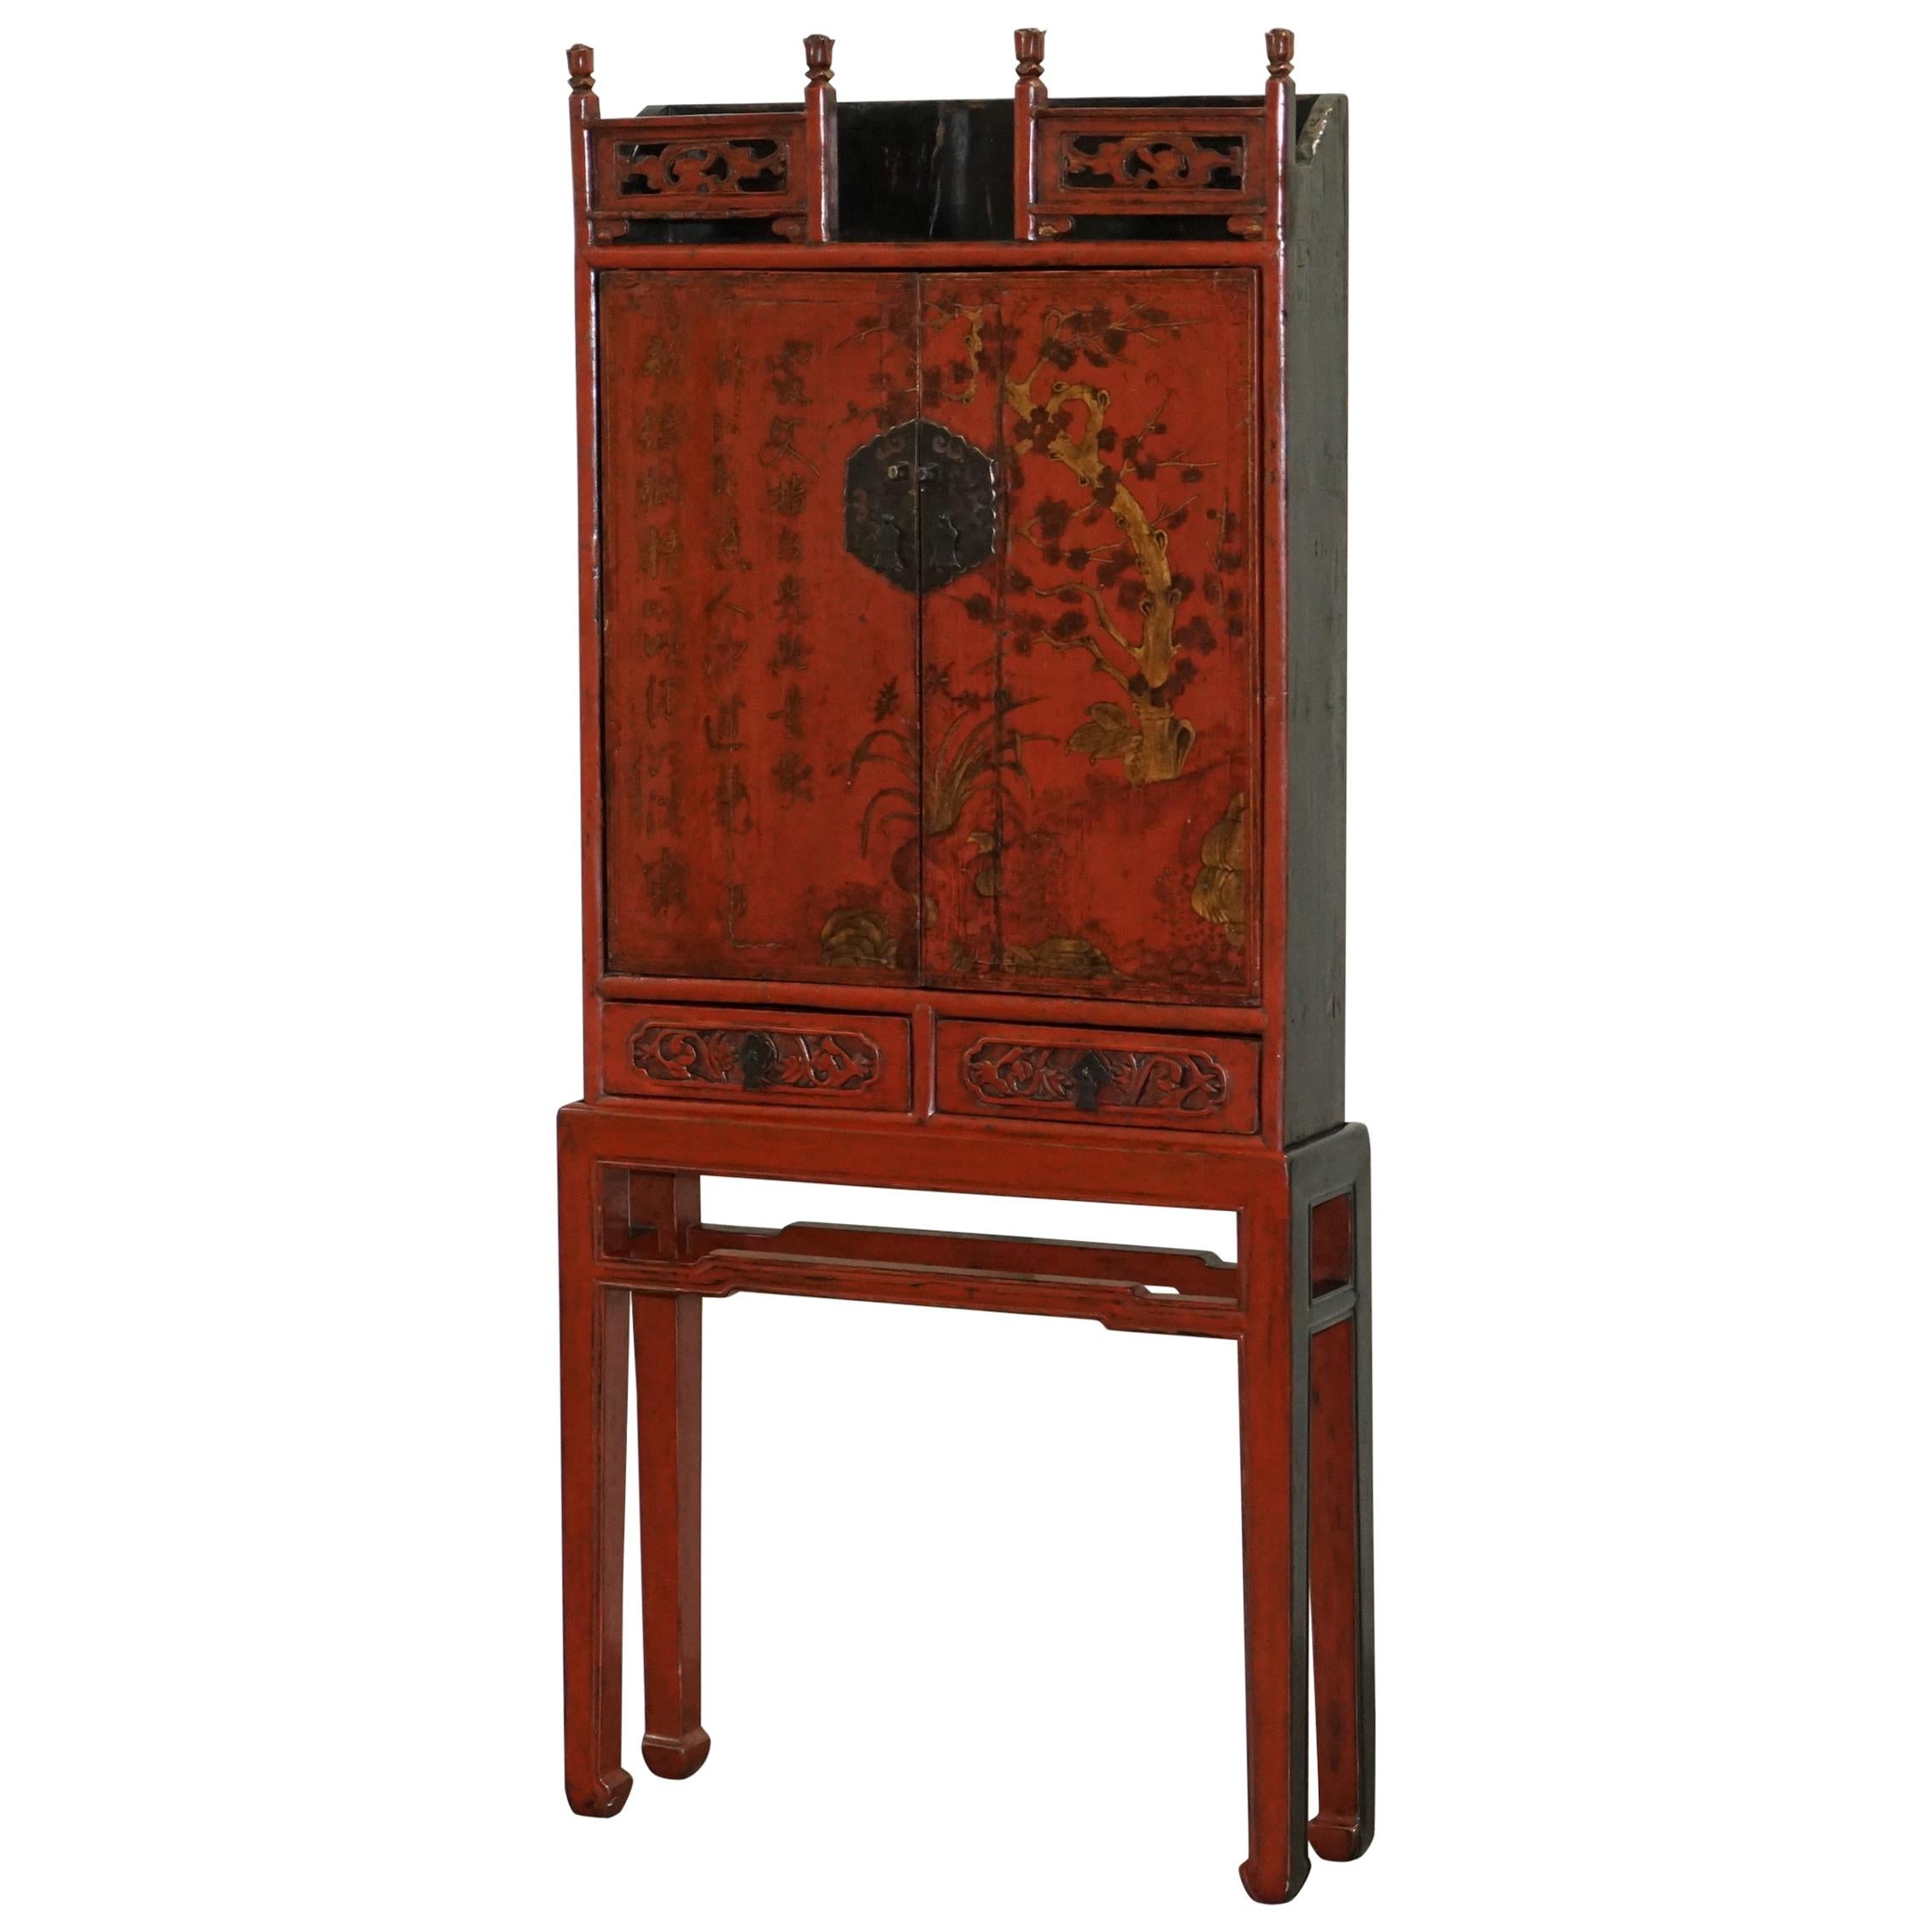 Rare & Exquisite Antique 19th Century Chinese Red Lacquer Cabinet on Stand